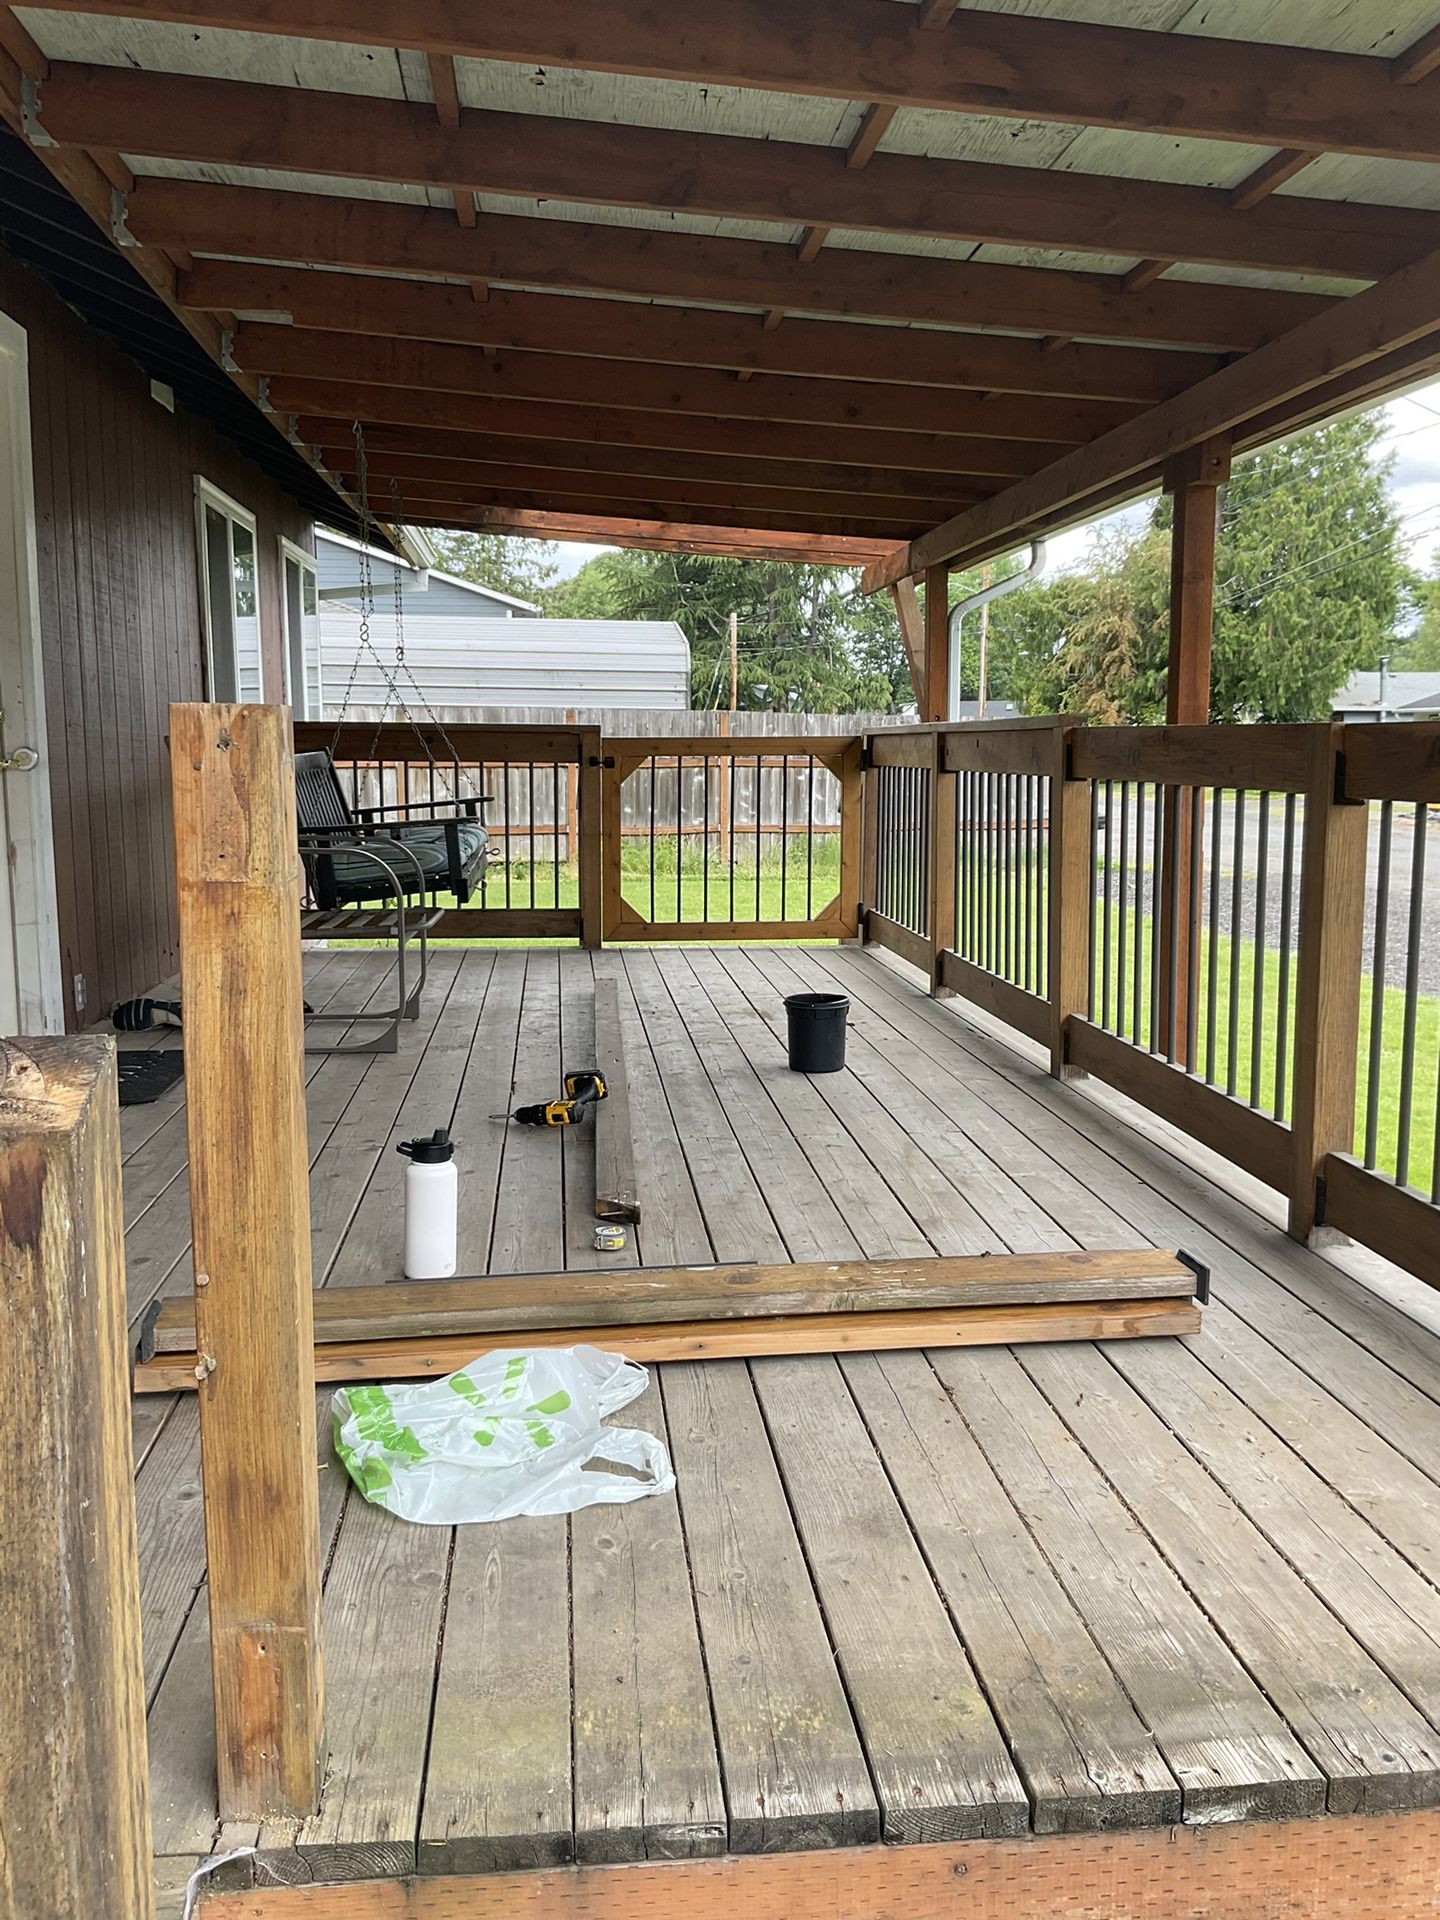 FREE DECK AND RAILING